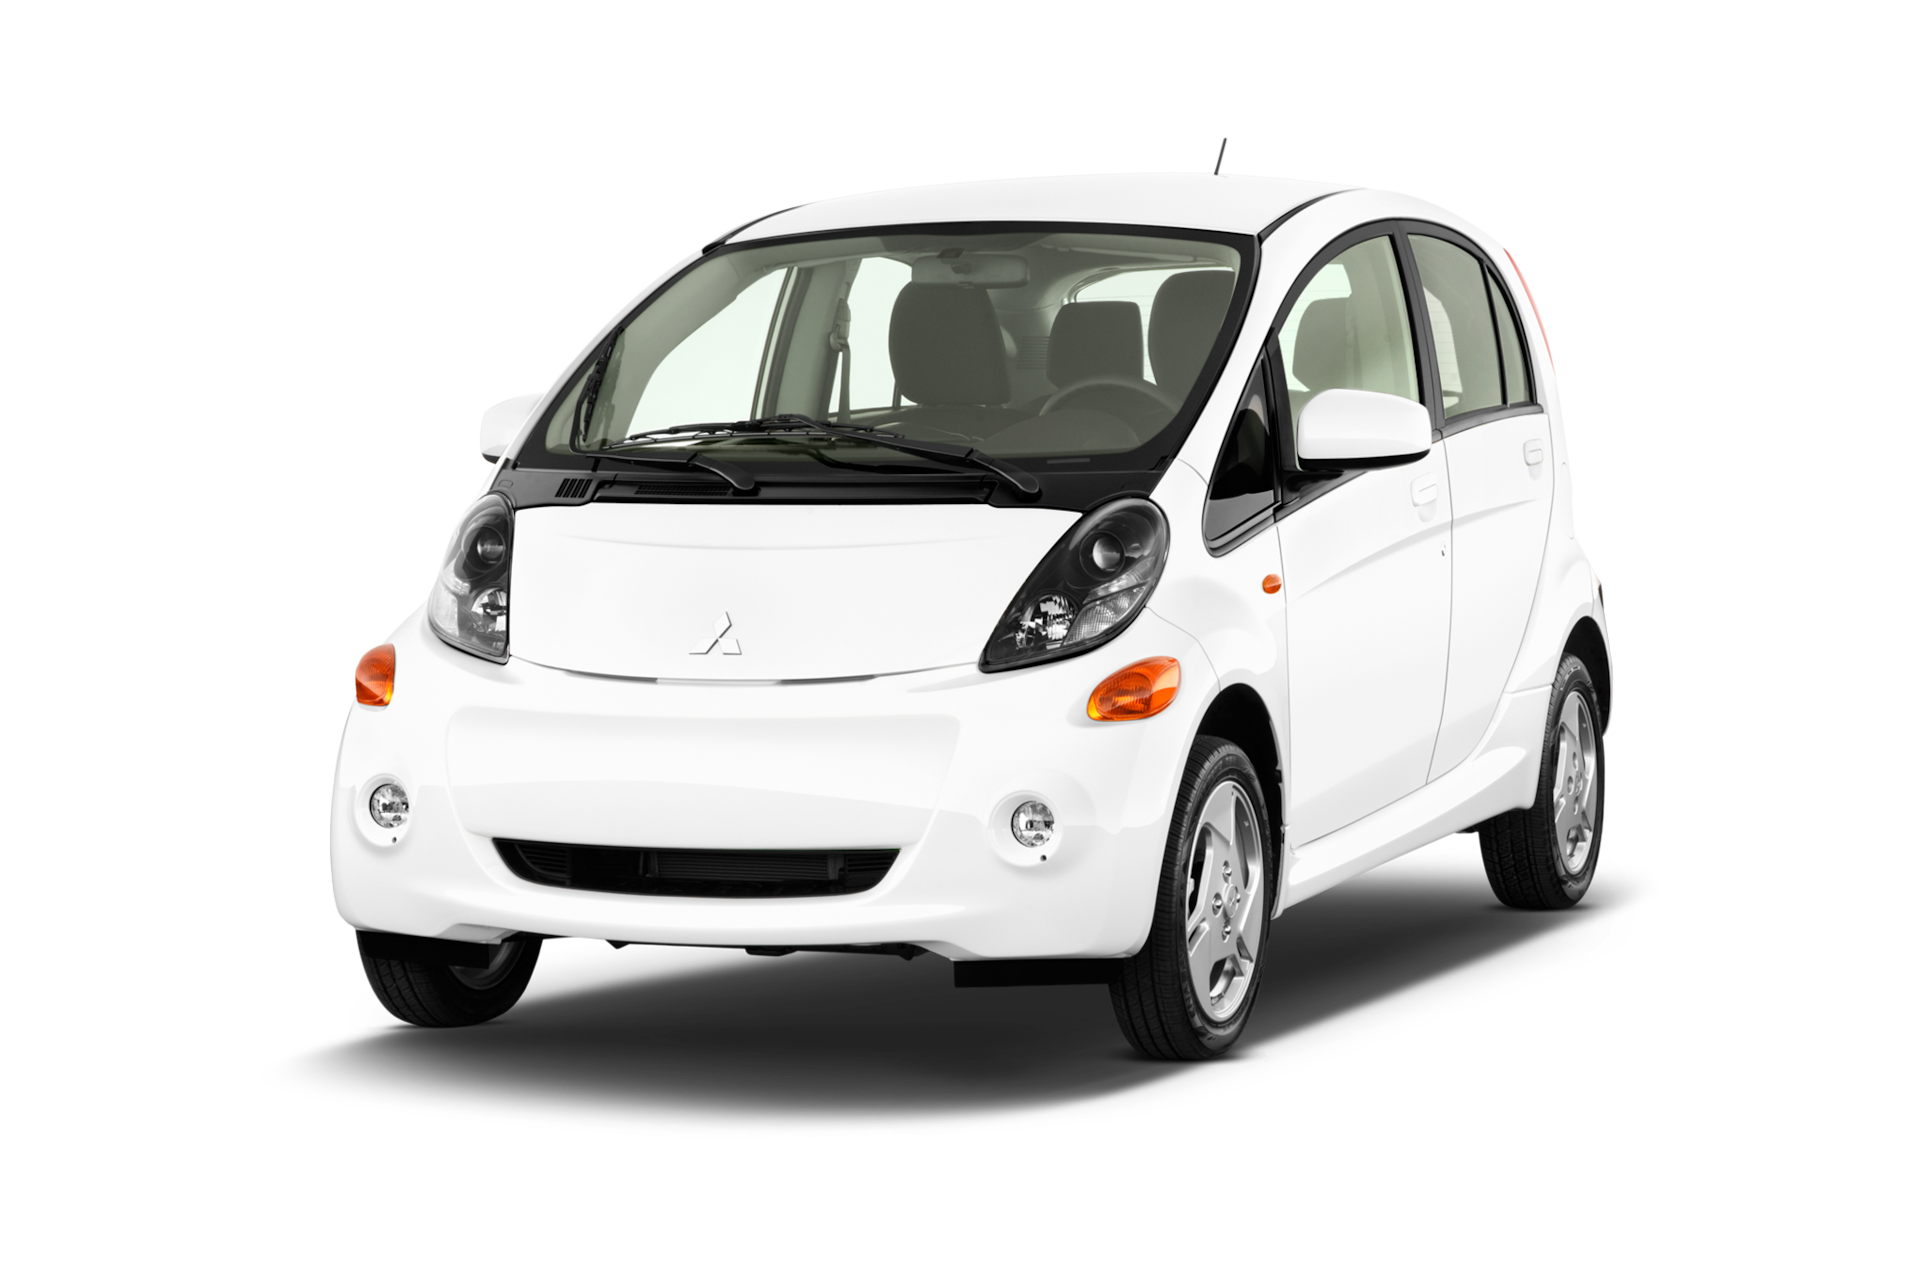 2014 Mitsubishi I-MiEV Buyer's Guide: Reviews, Specs, Comparisons